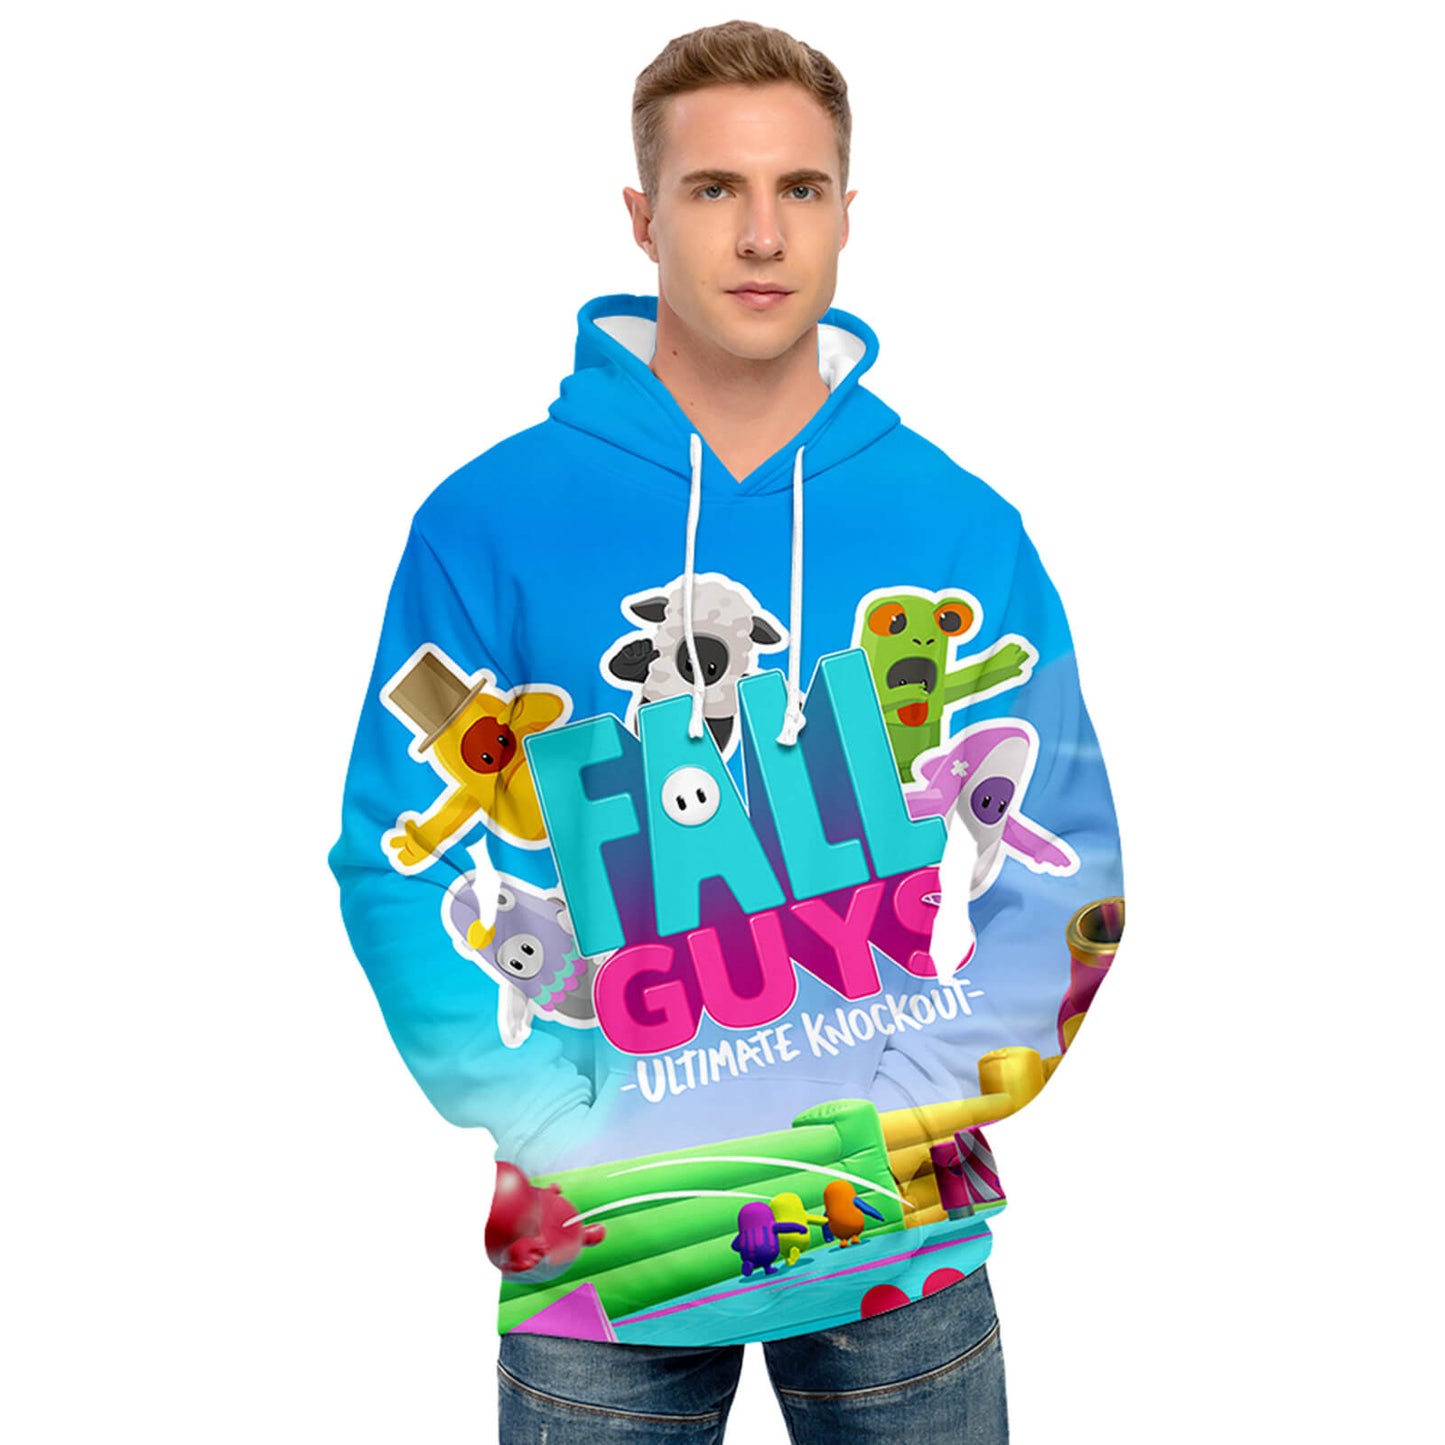 Fall Guys Hoodie Ultimate Knockout Unisex Fall Guys Video Game Sweatshirt Adults/Youth